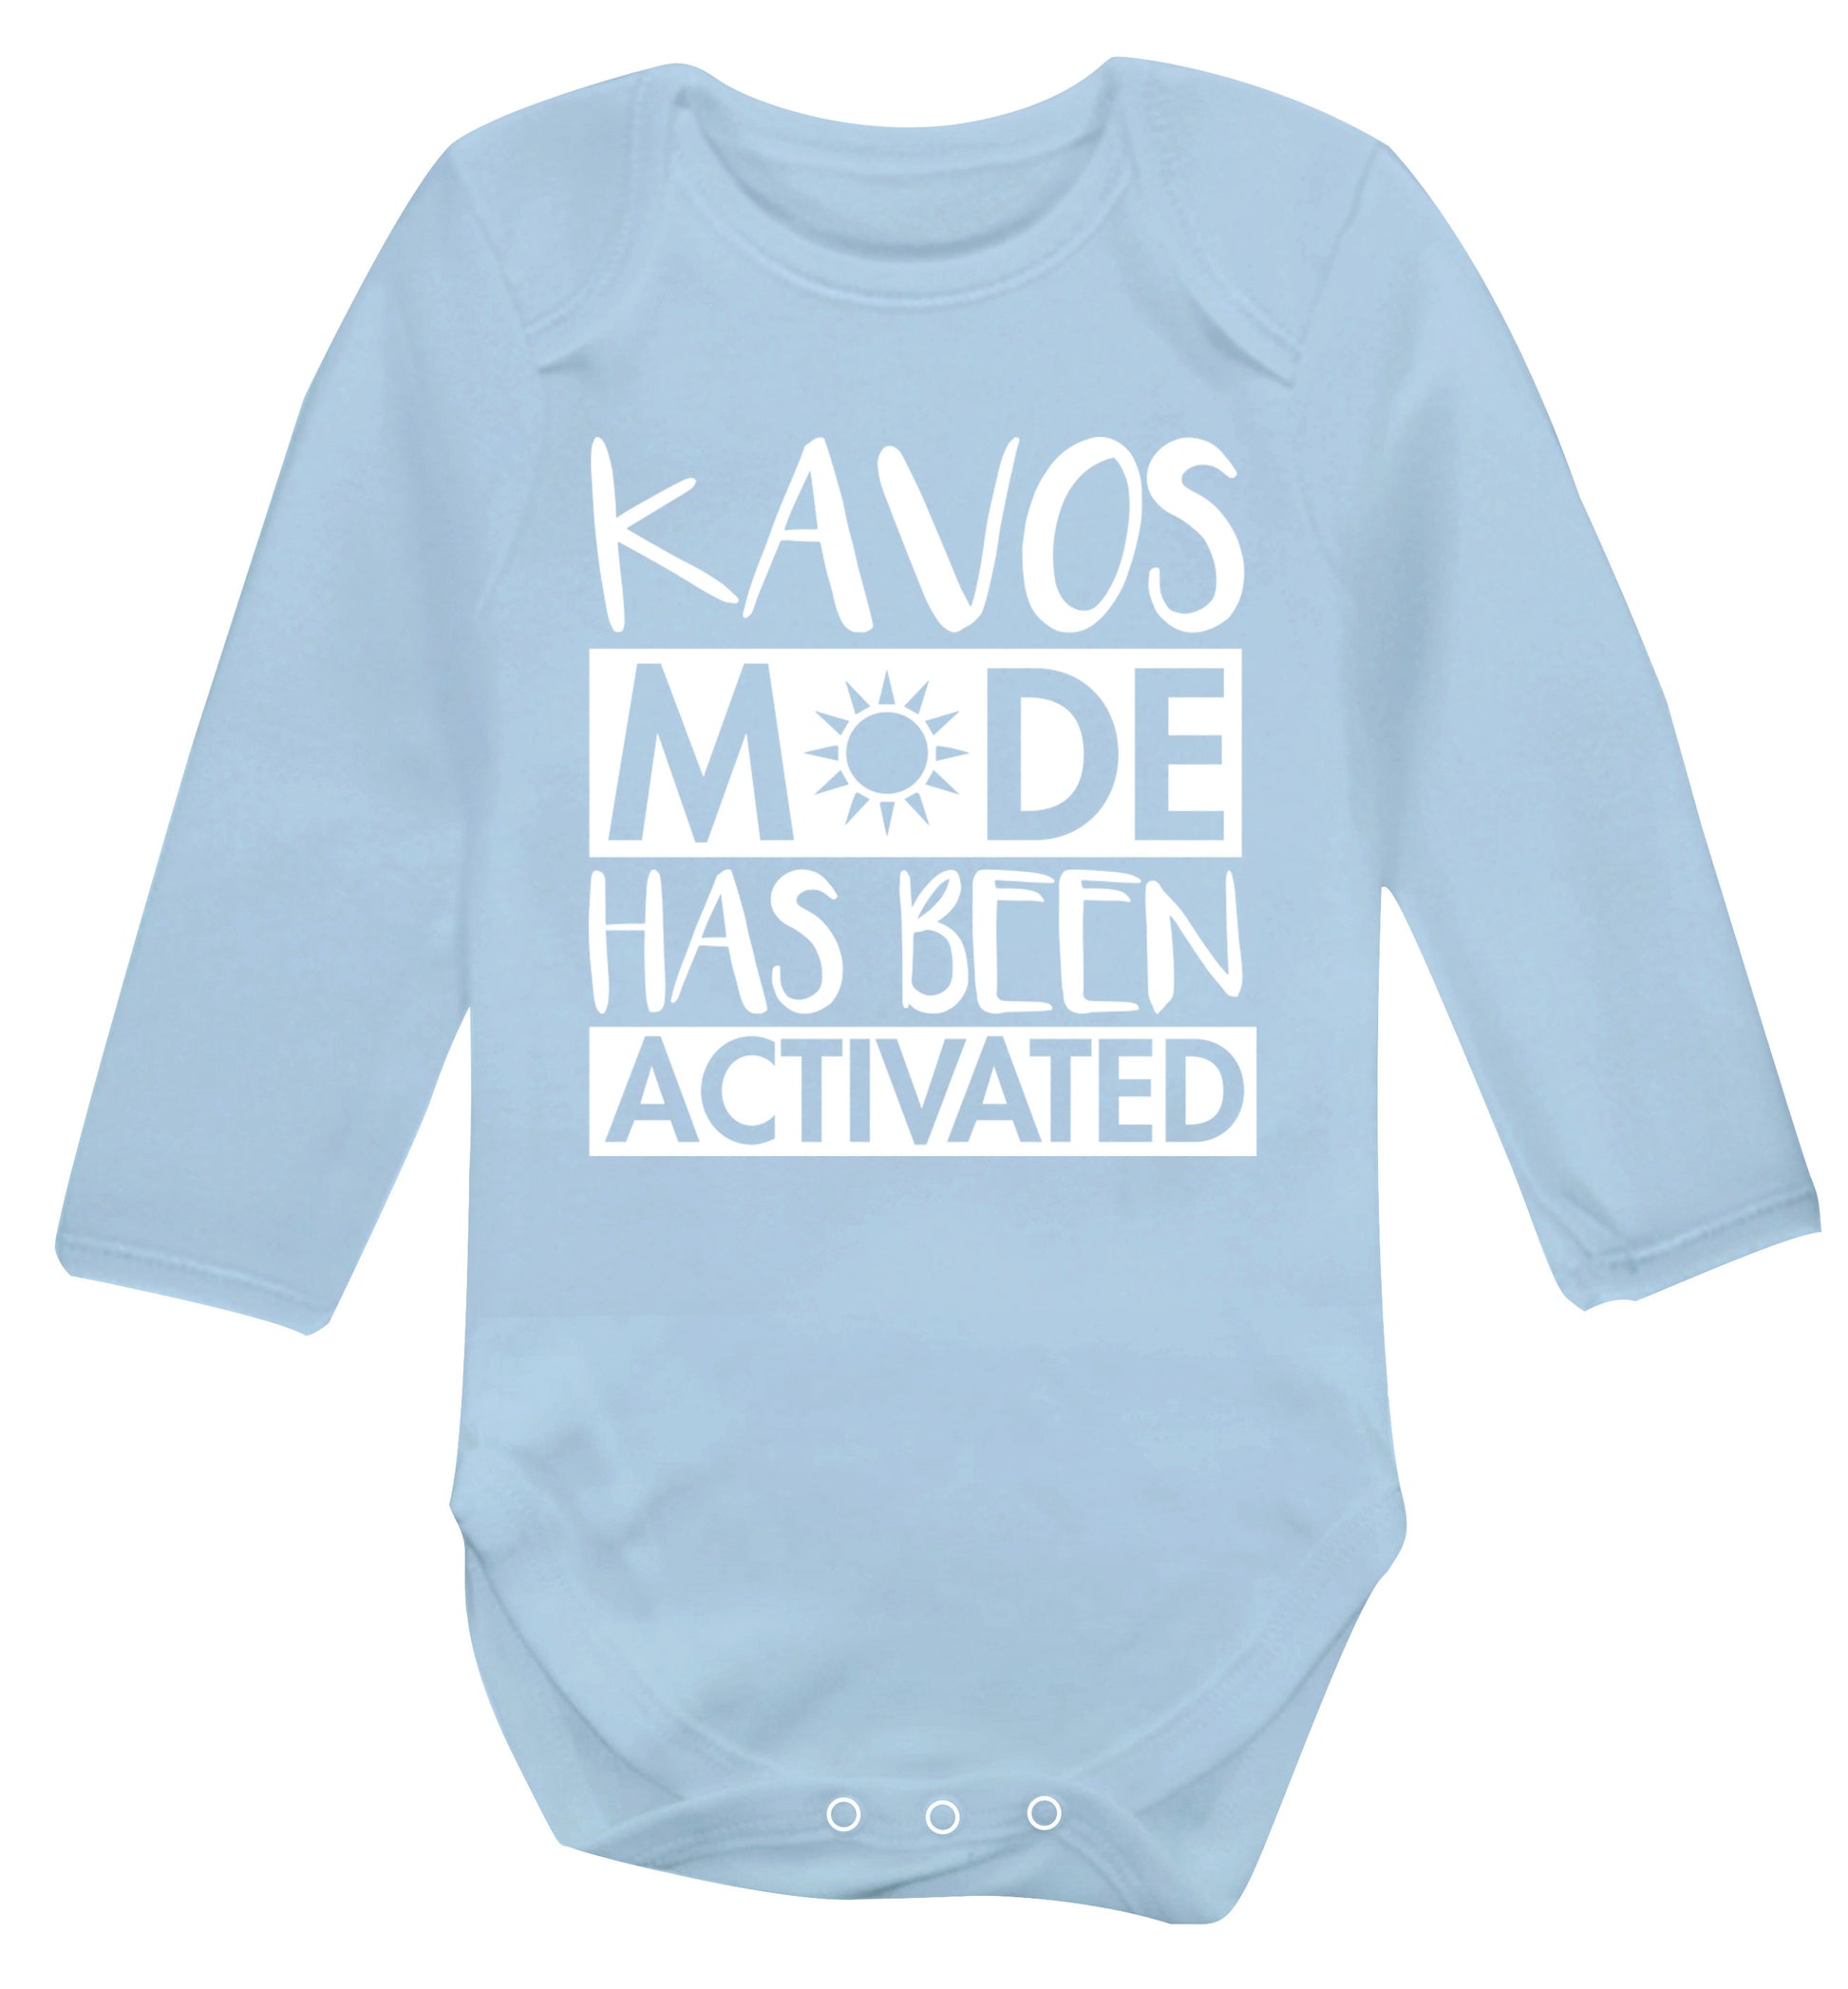 Kavos mode has been activated Baby Vest long sleeved pale blue 6-12 months